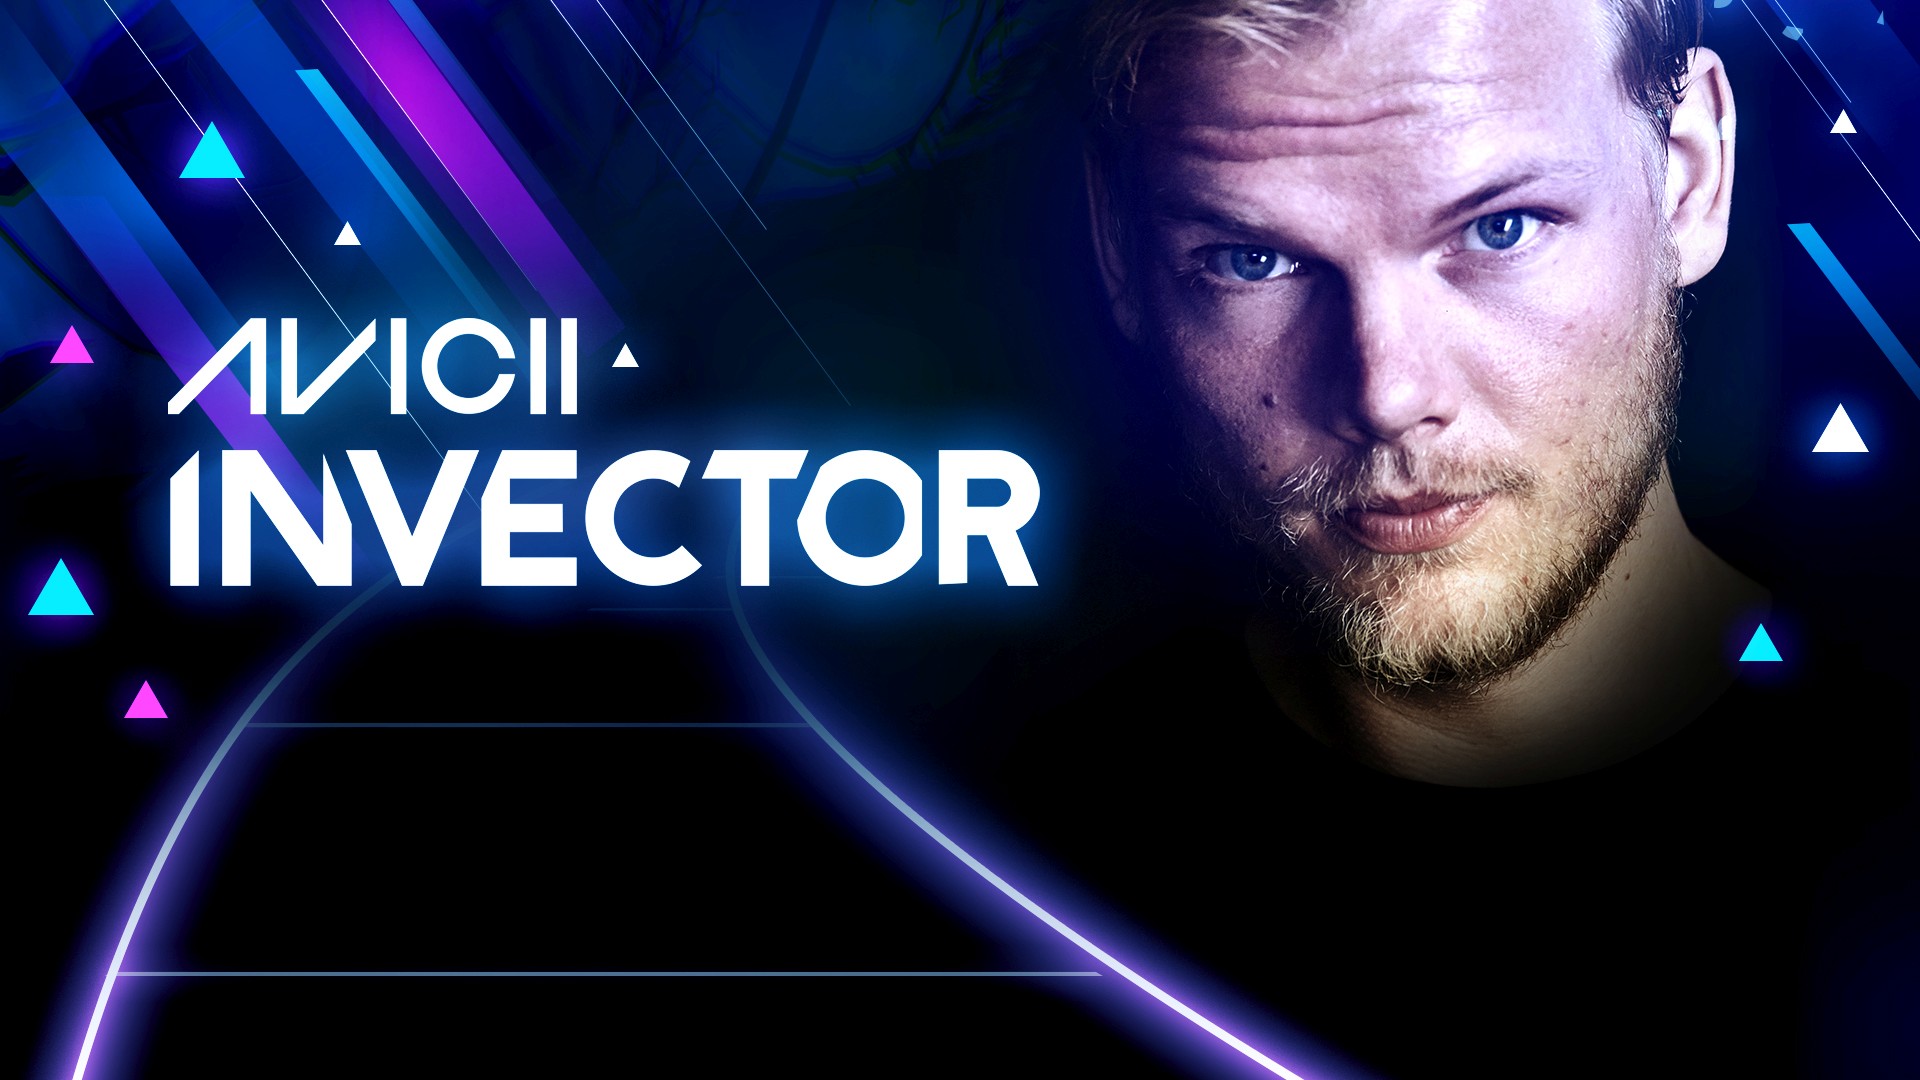 Avicii Invector with a Legend